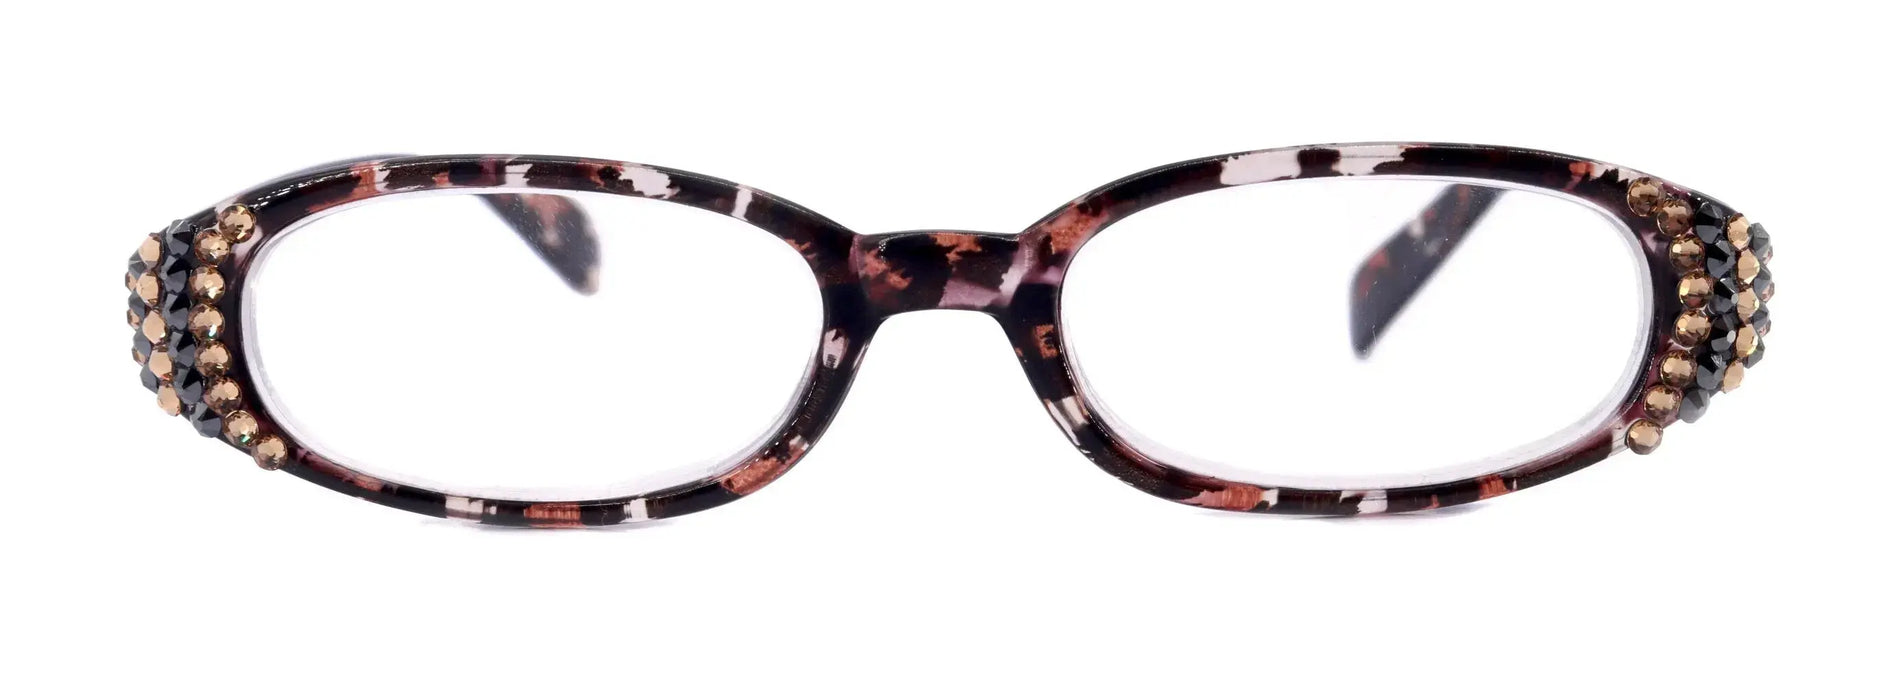 Isabella, (Bling) Reading Glasses Women W (Cooper, Light Colorado) Genuine European Crystals Animal Print NY Fifth Avenue (Wide Frame) 